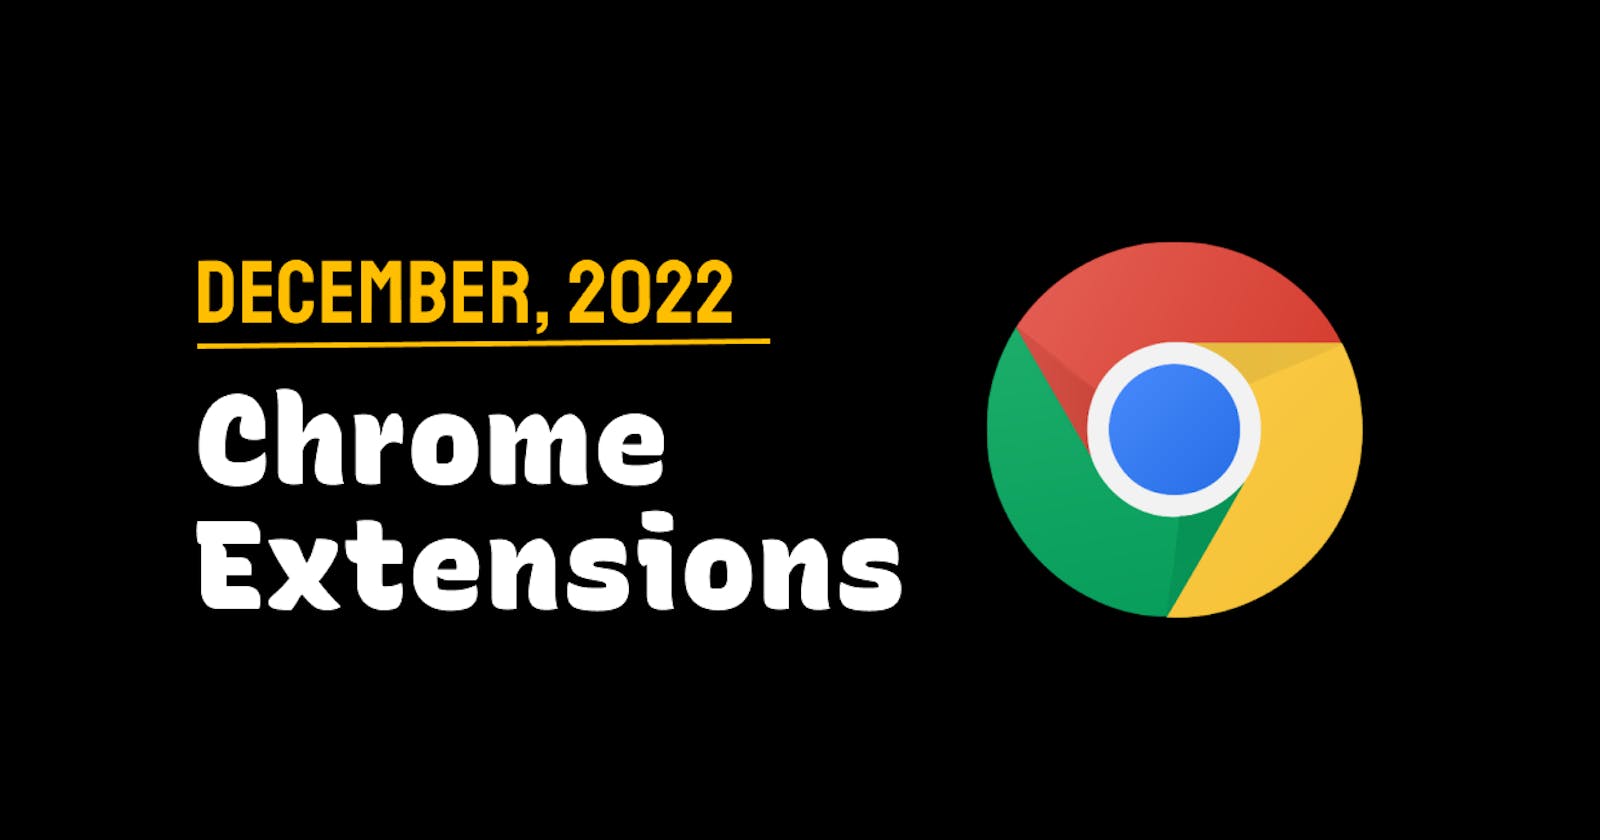 Chrome Extensions of the Month - December 2022